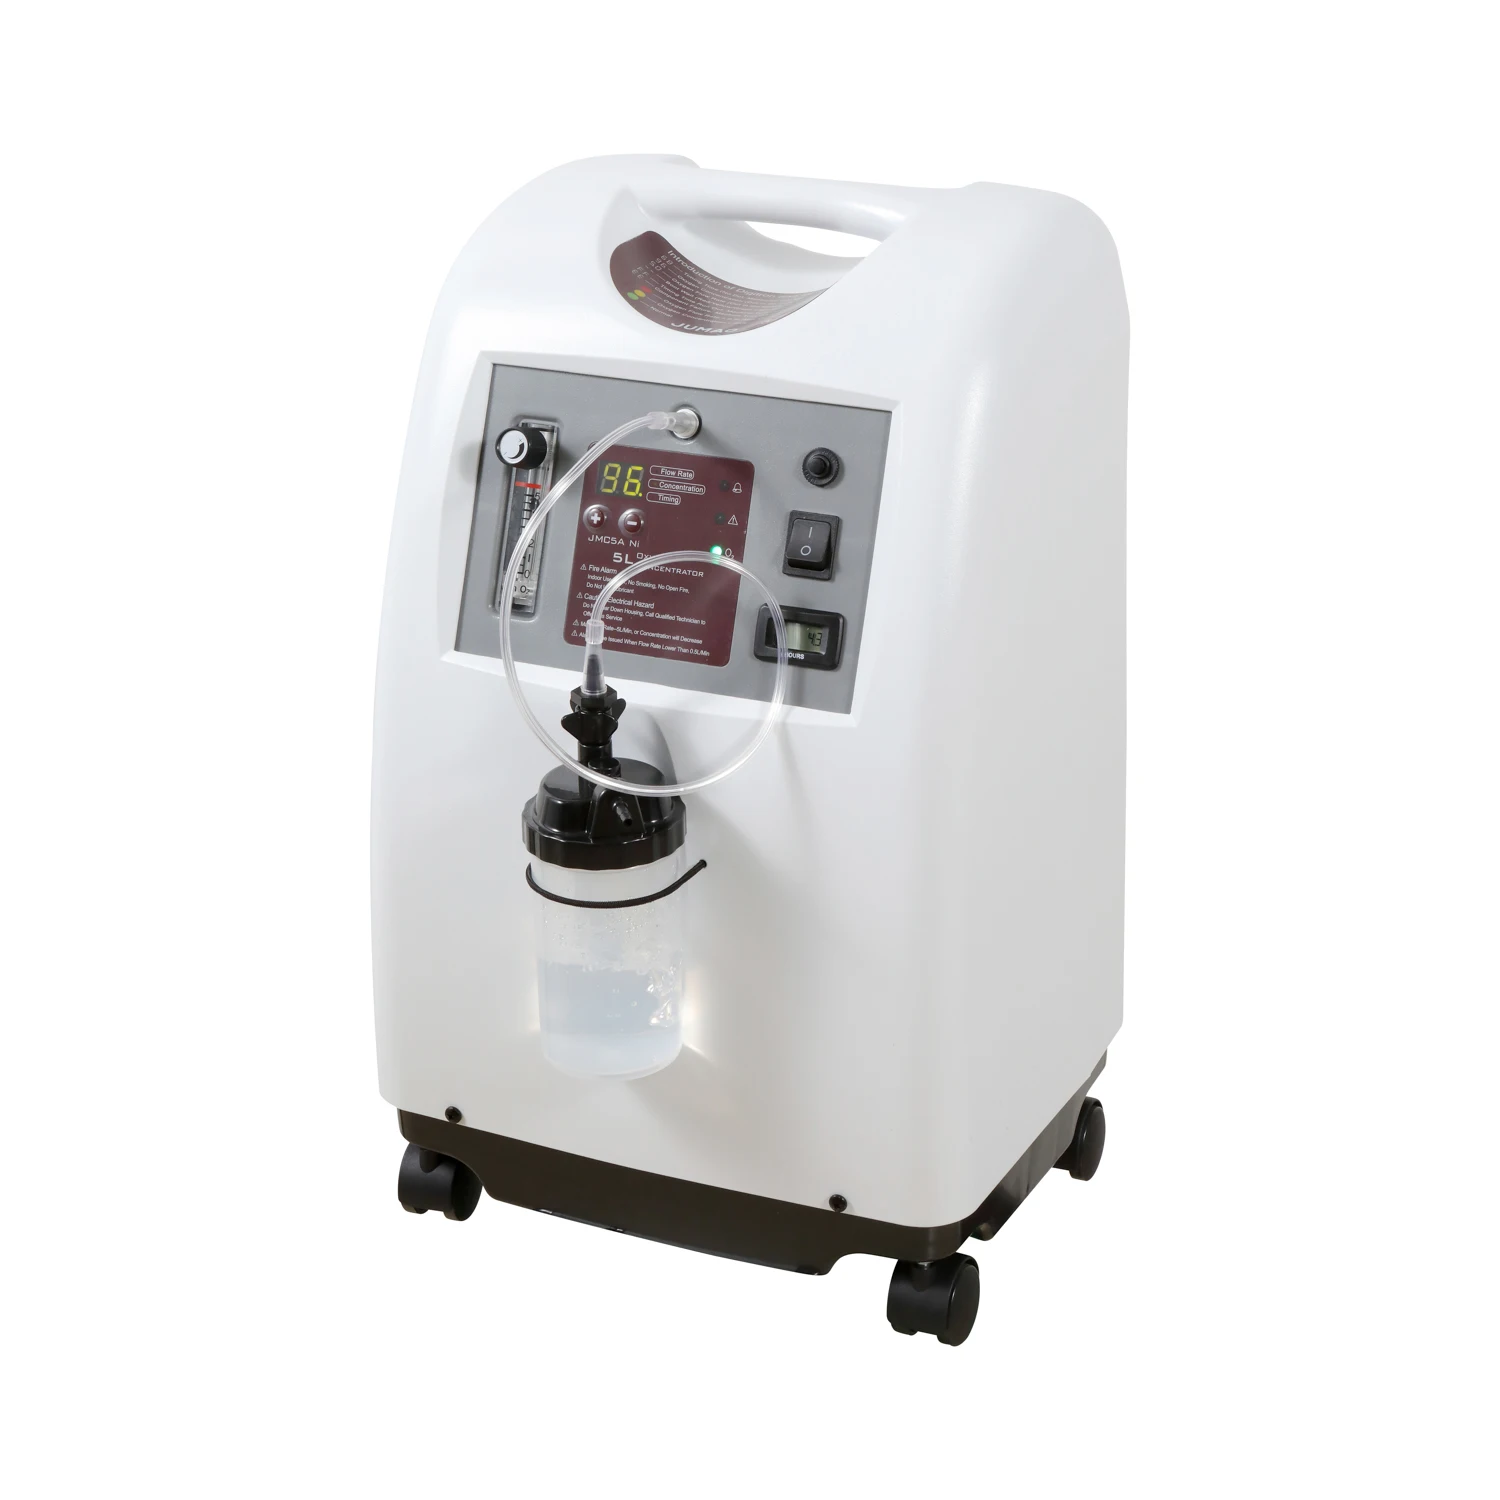 

ready to ship JUMAO 5A Ni Portable Oxygen-Concentrator with CE iso certificate personal home use for patient